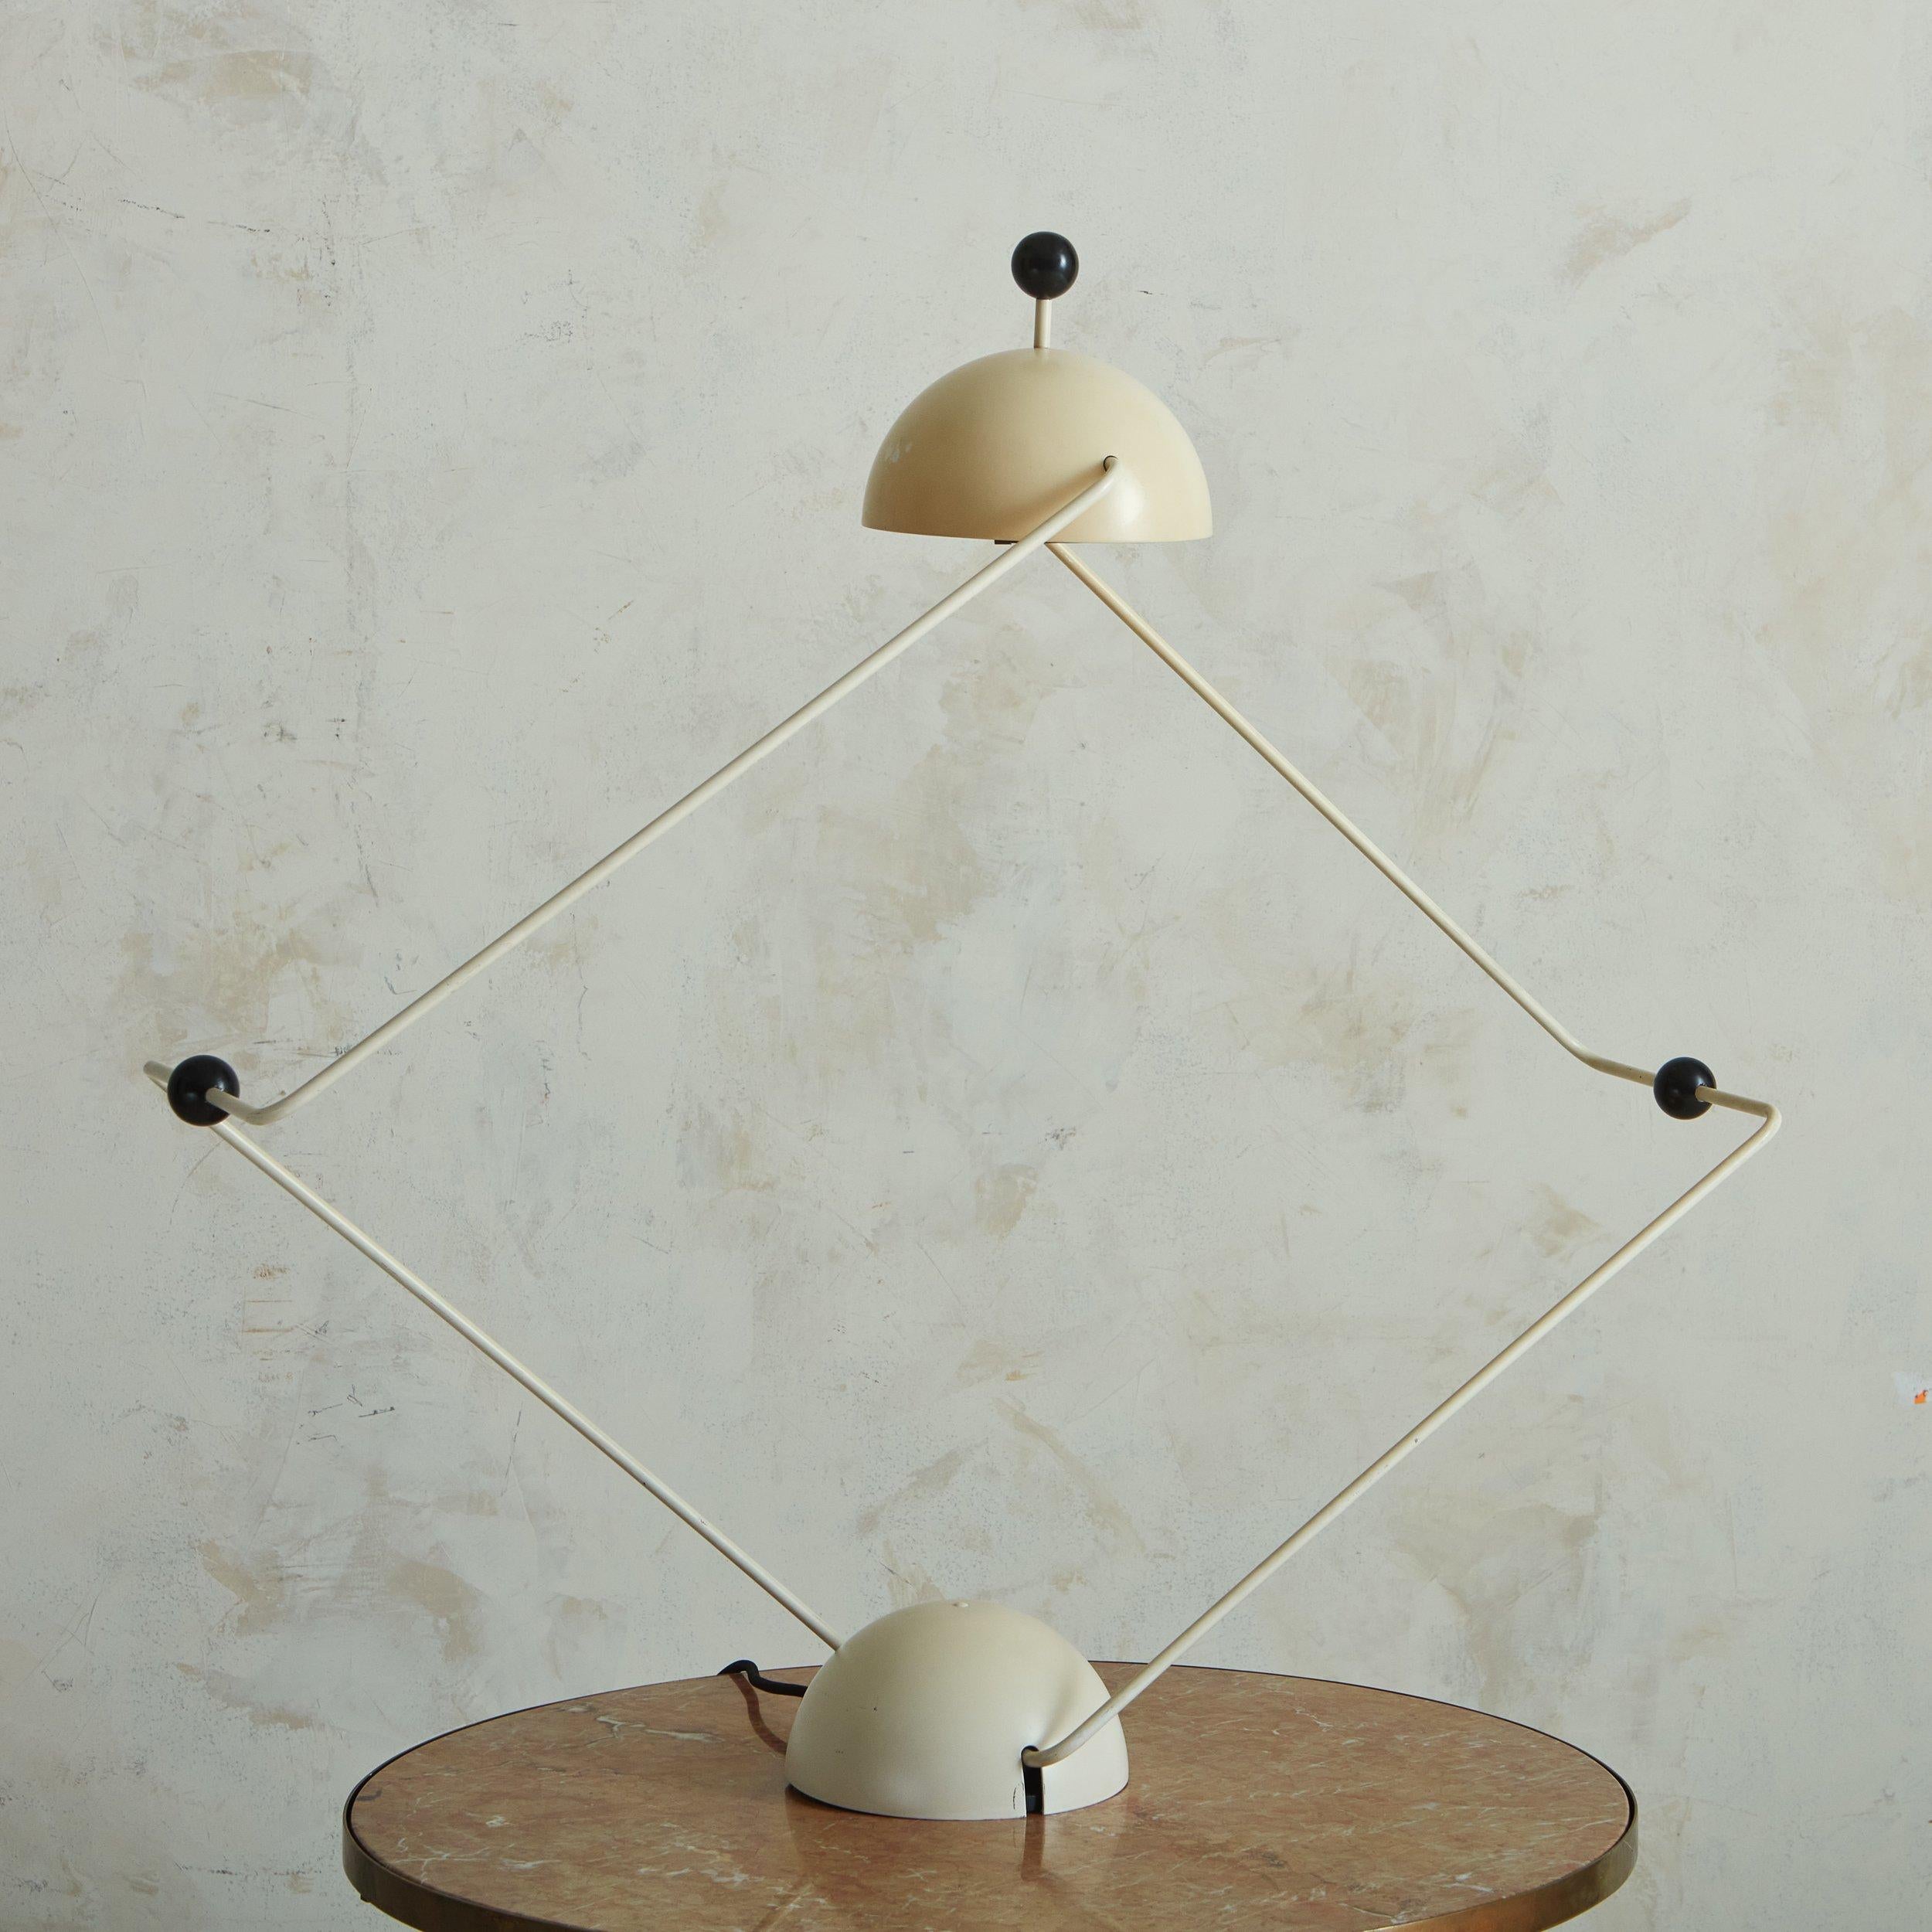 A vintage 1970s adjustable table lamp with striking parallels to early designs by Paolo Piva. The lamp has an original ivory finish to a metal frame with black accents. At full extension, it stands at 44”.
  
 DIMENSIONS: 8”W x 41”D fully extended x